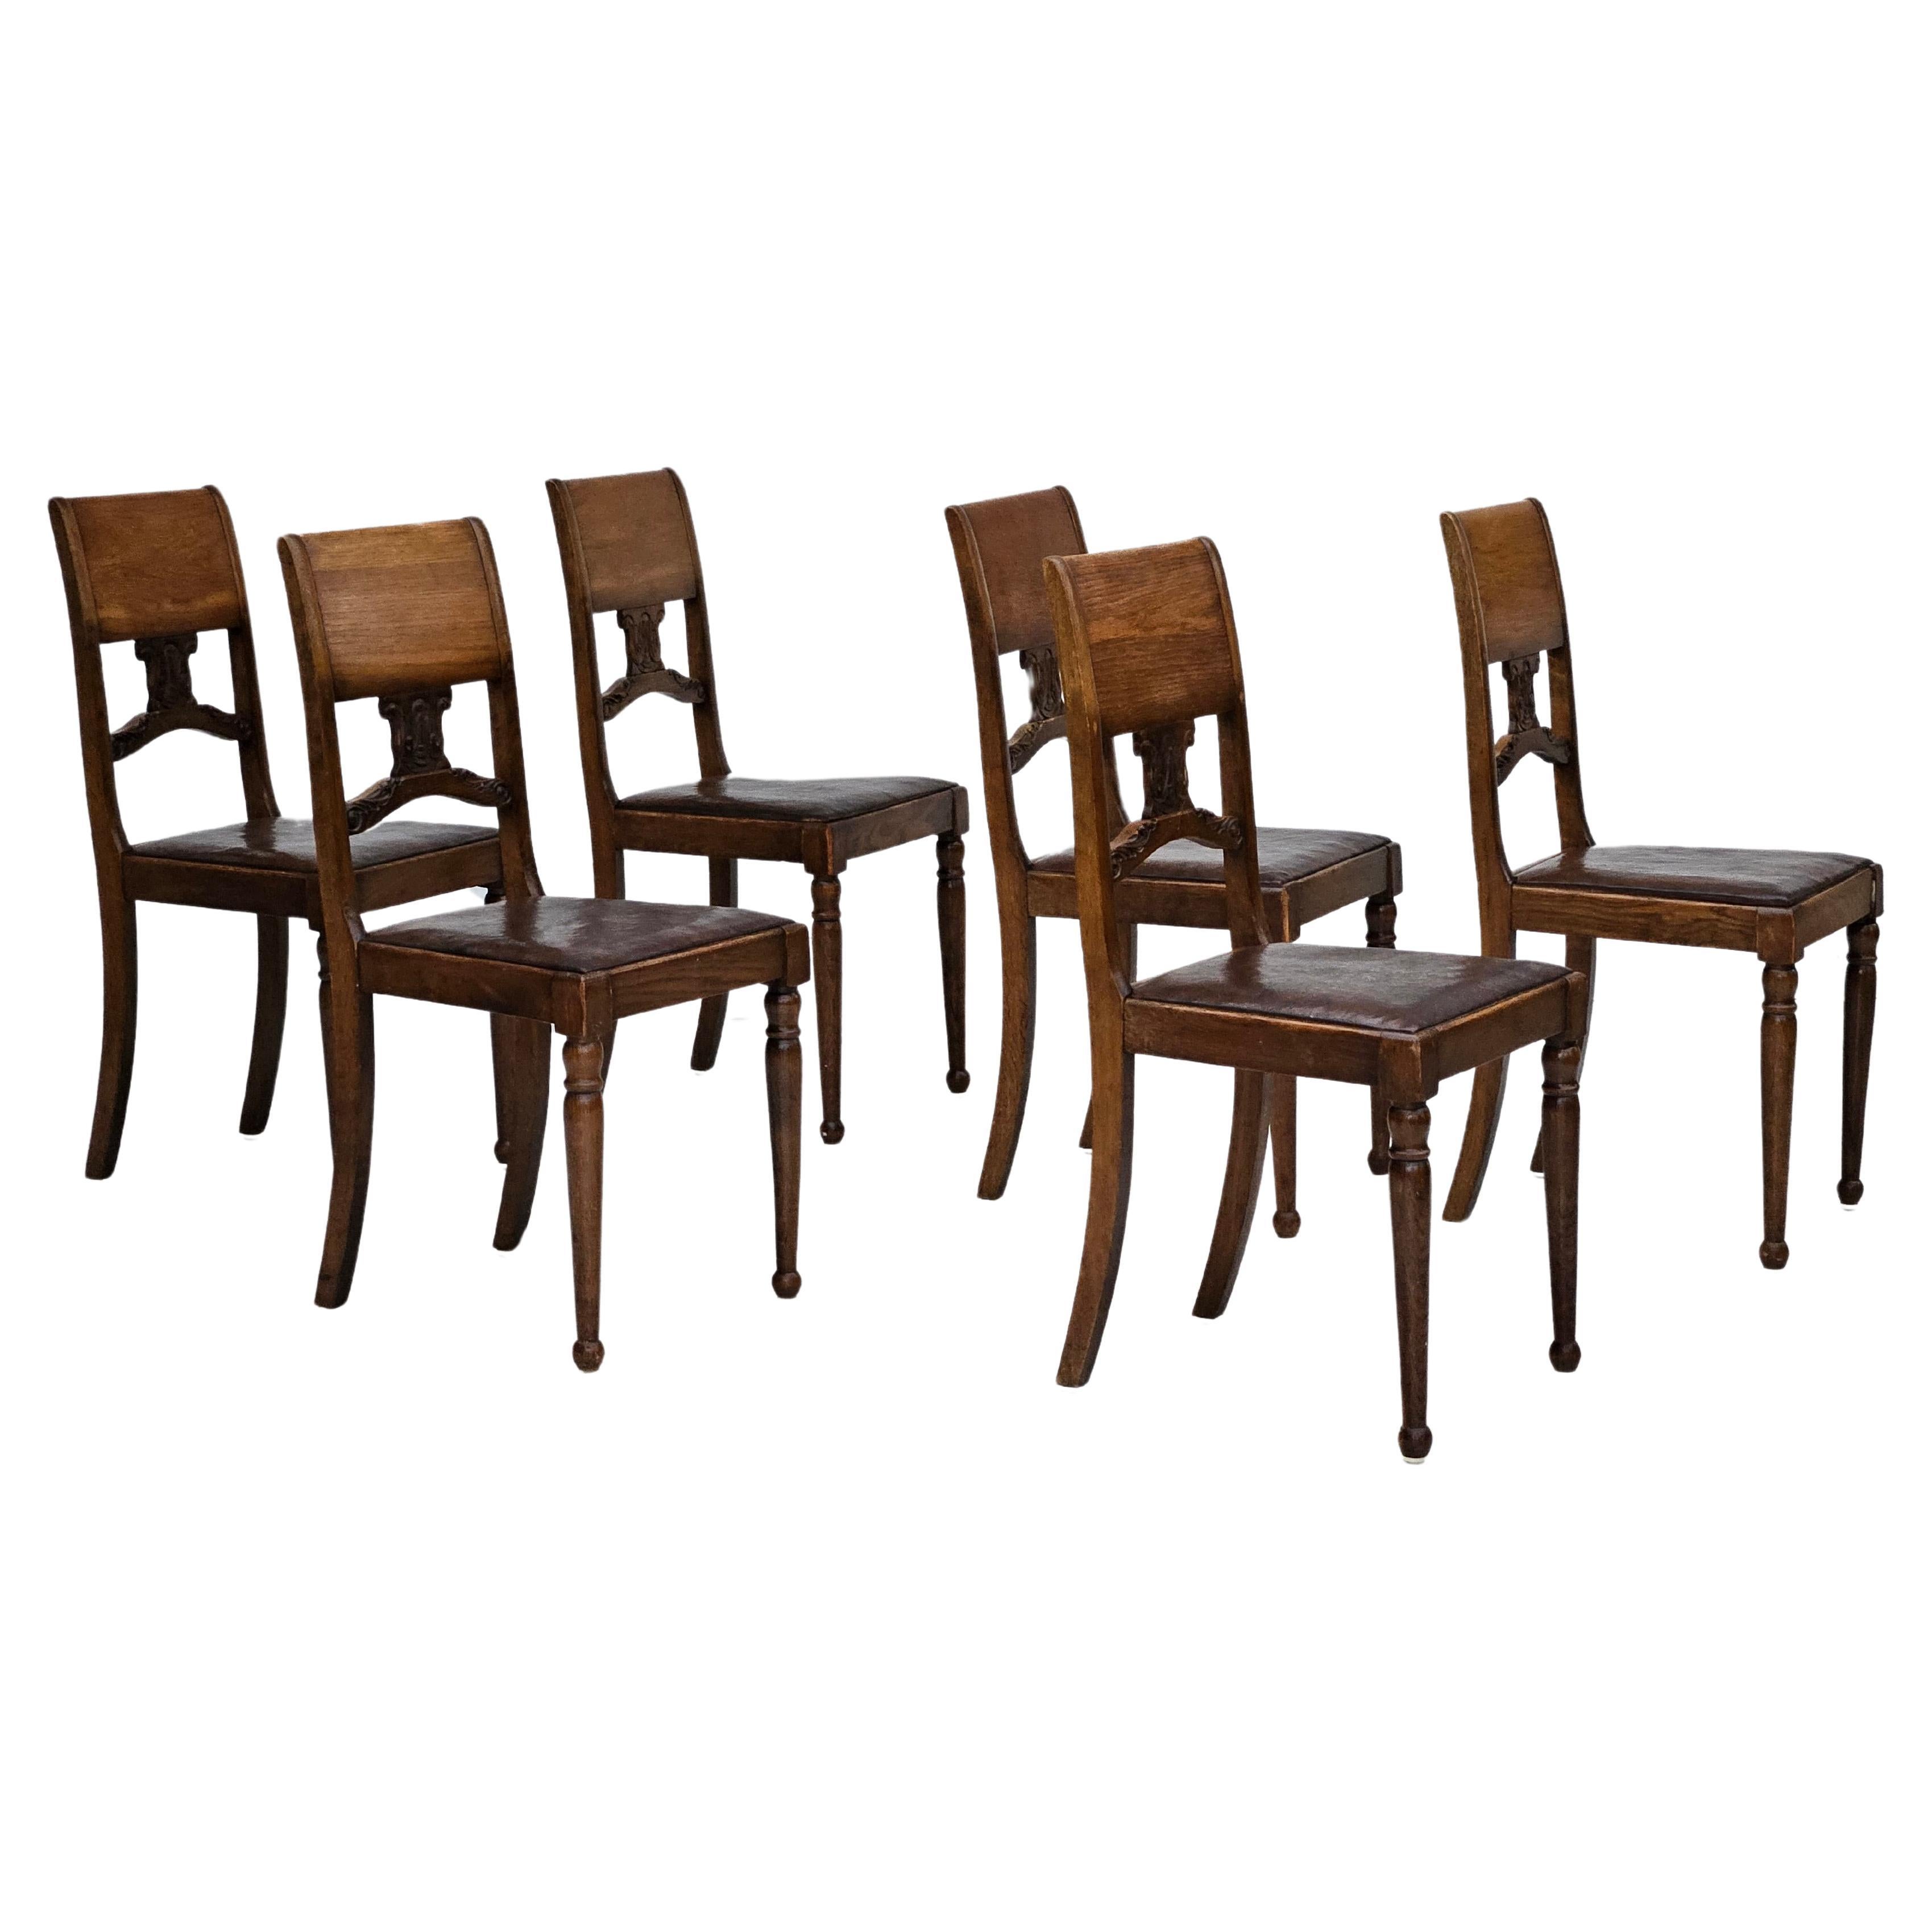 1930s, set of 6 scandinavian chairs, original good condition. For Sale